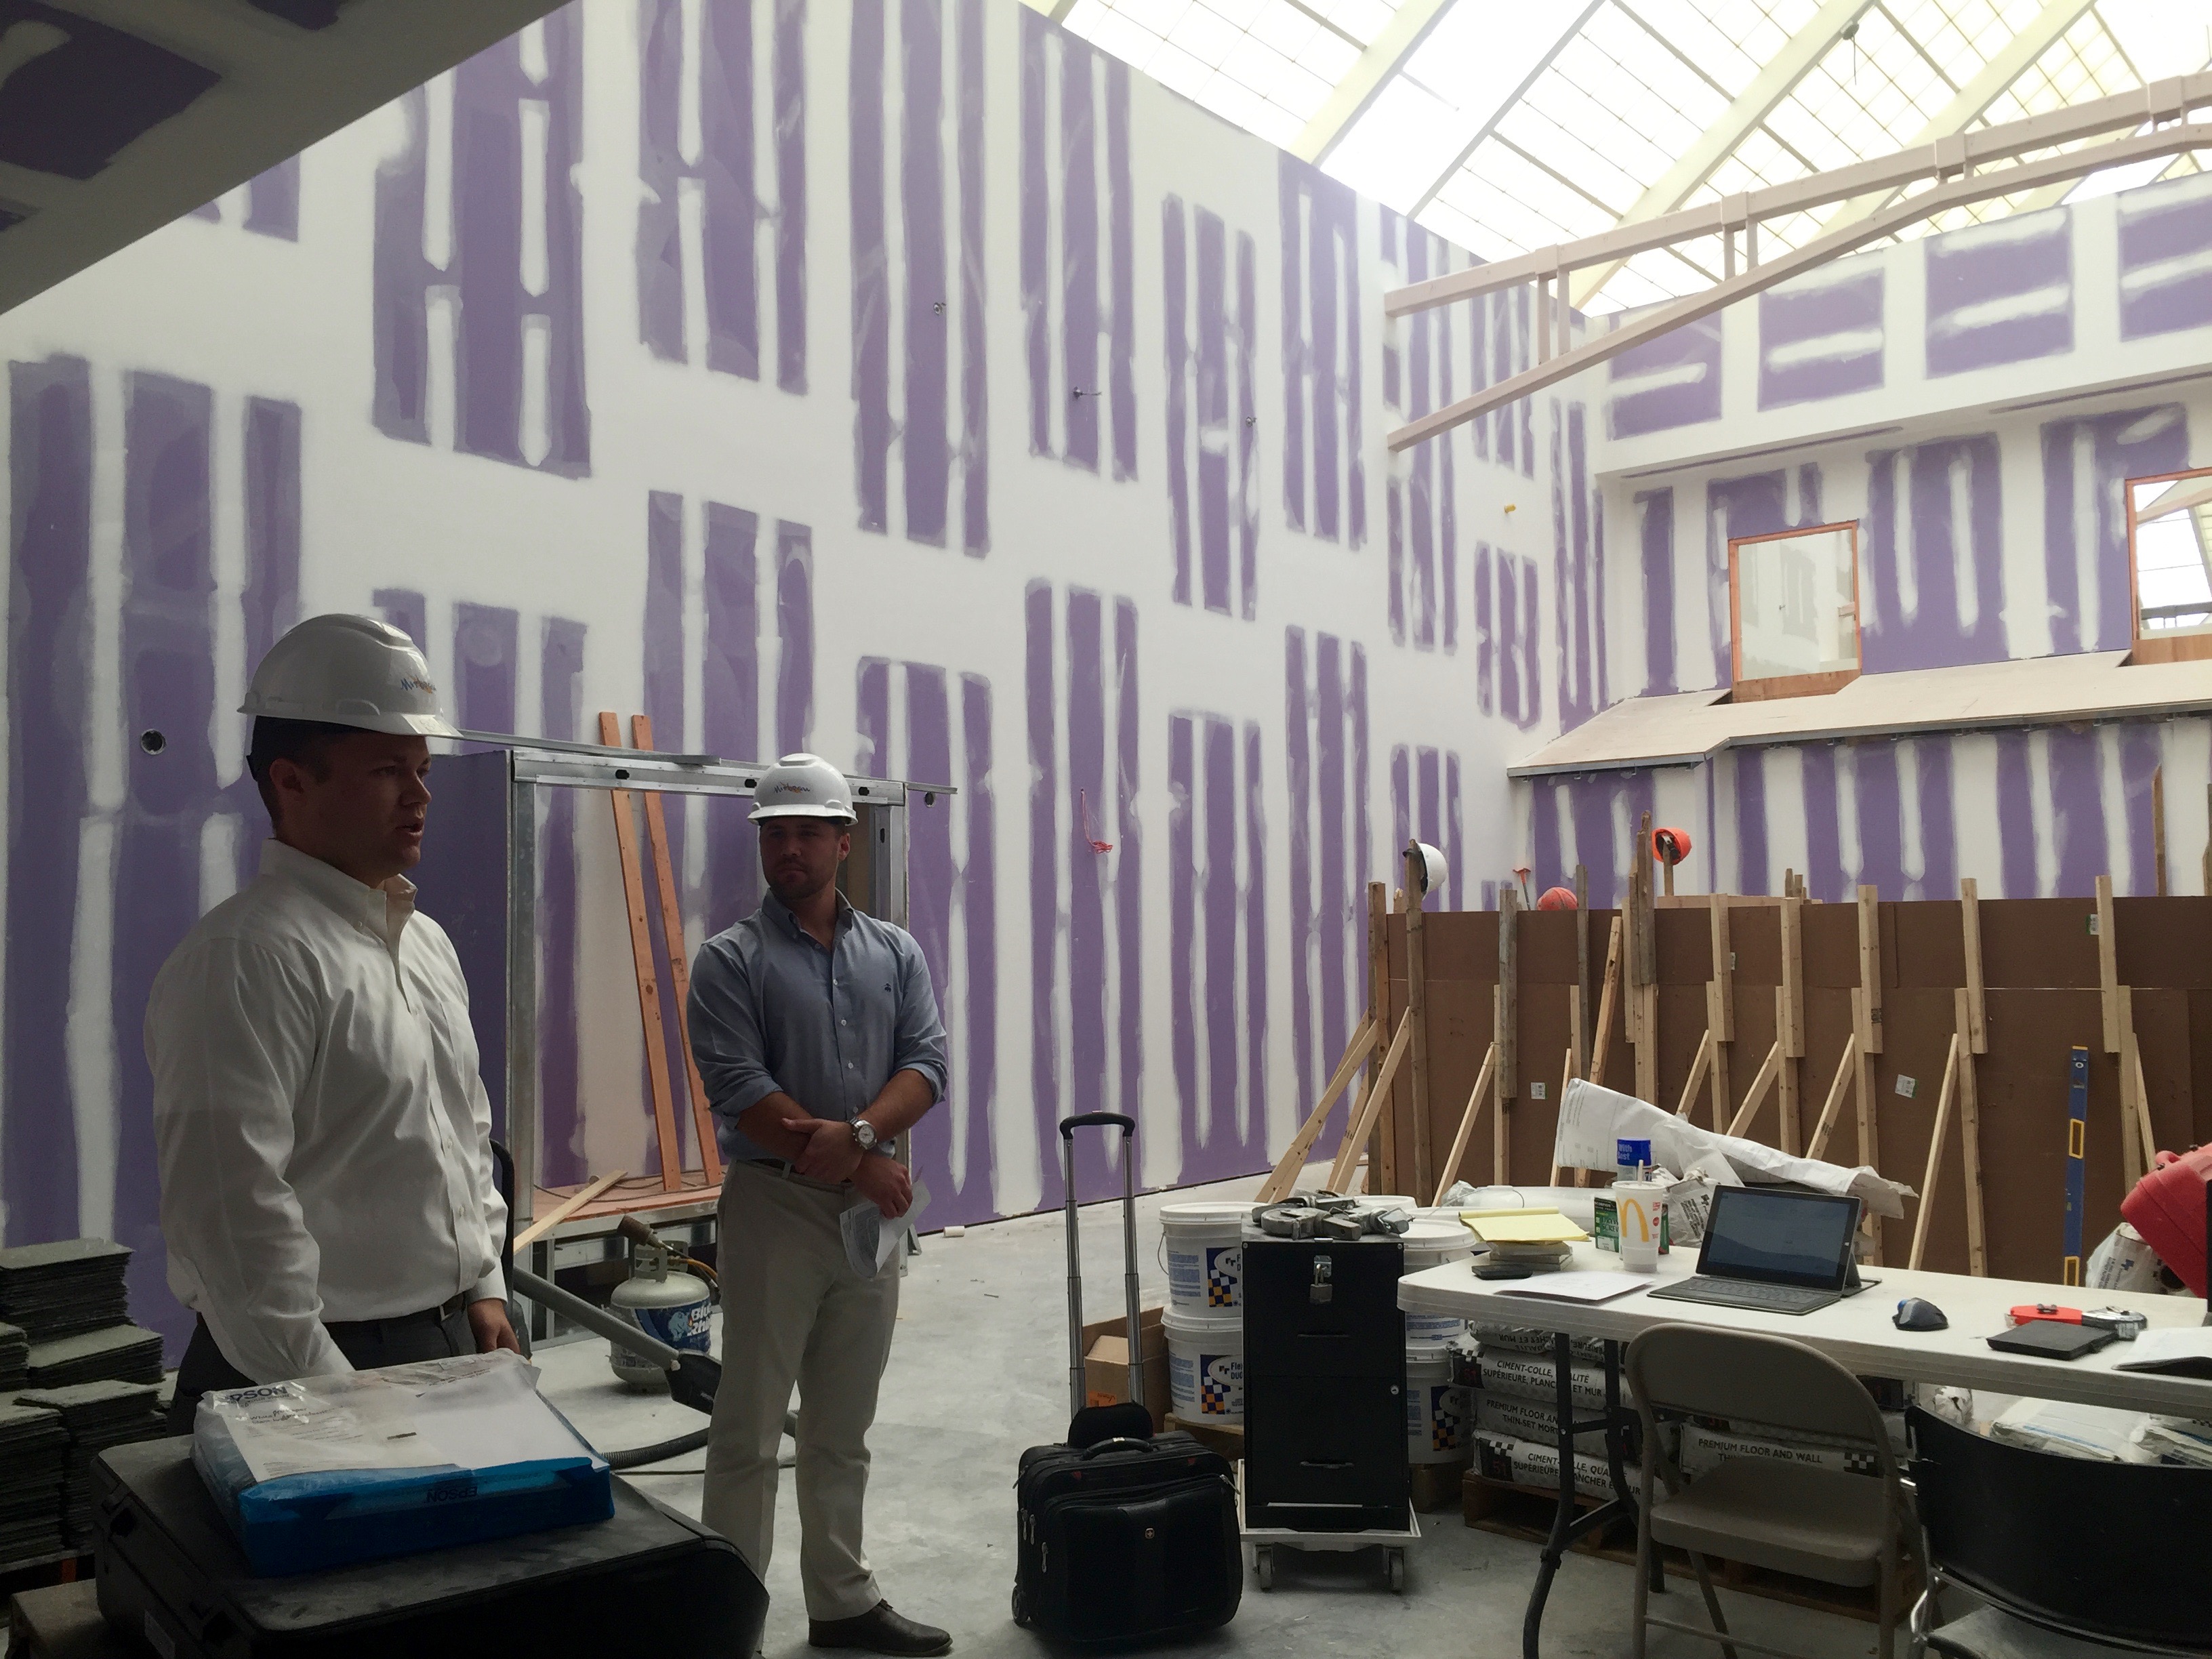 Hard hard hat tour of Spa Mirbeau at Crossgates Mall in Albany